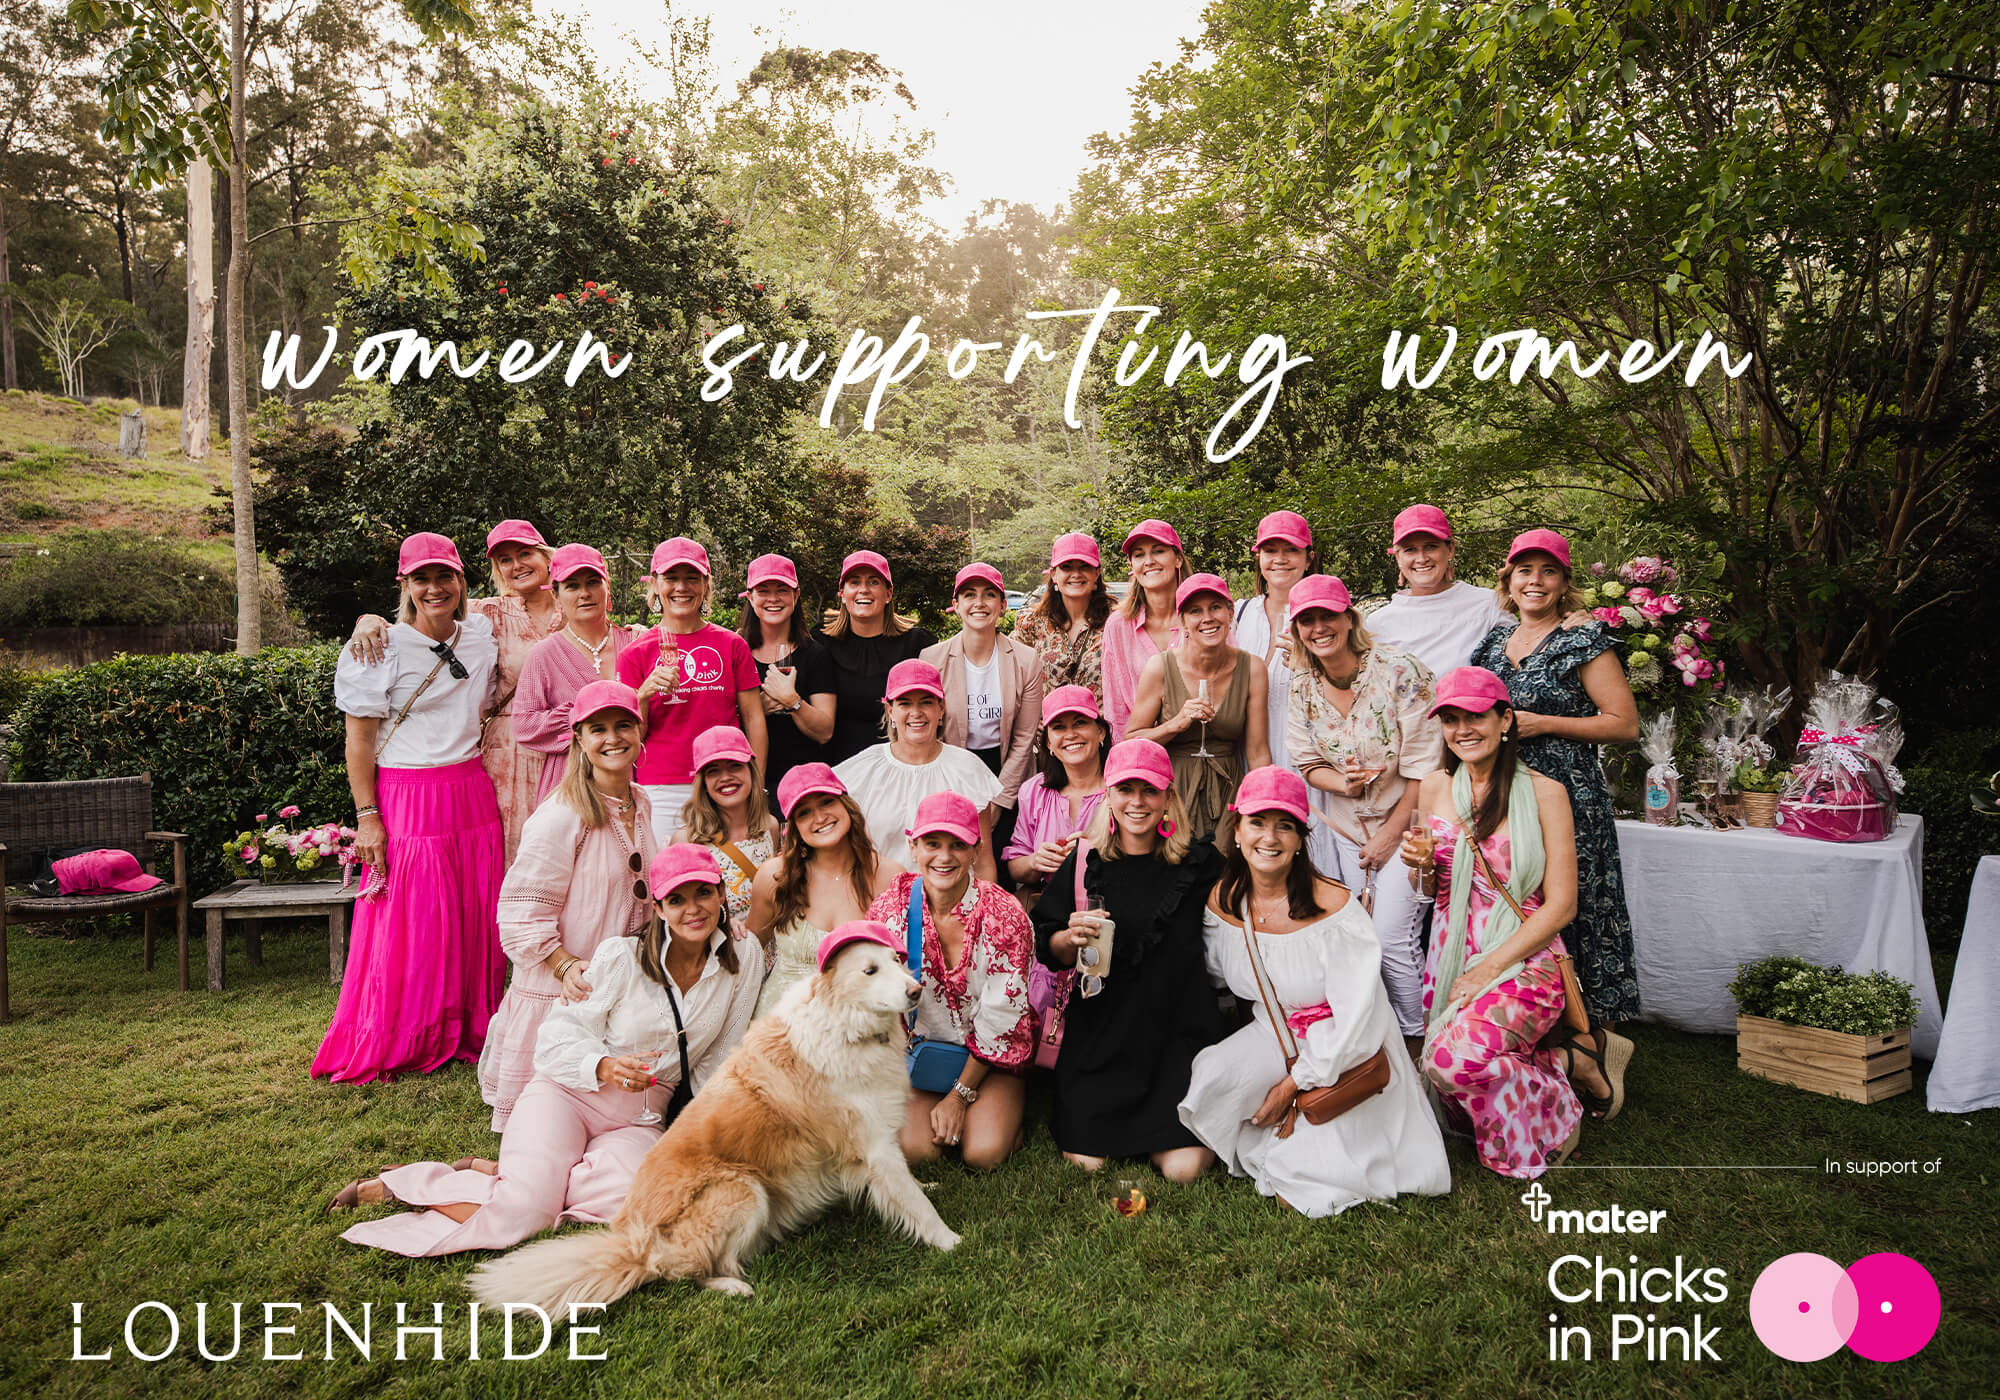 Louenhide x Chicks in Pink